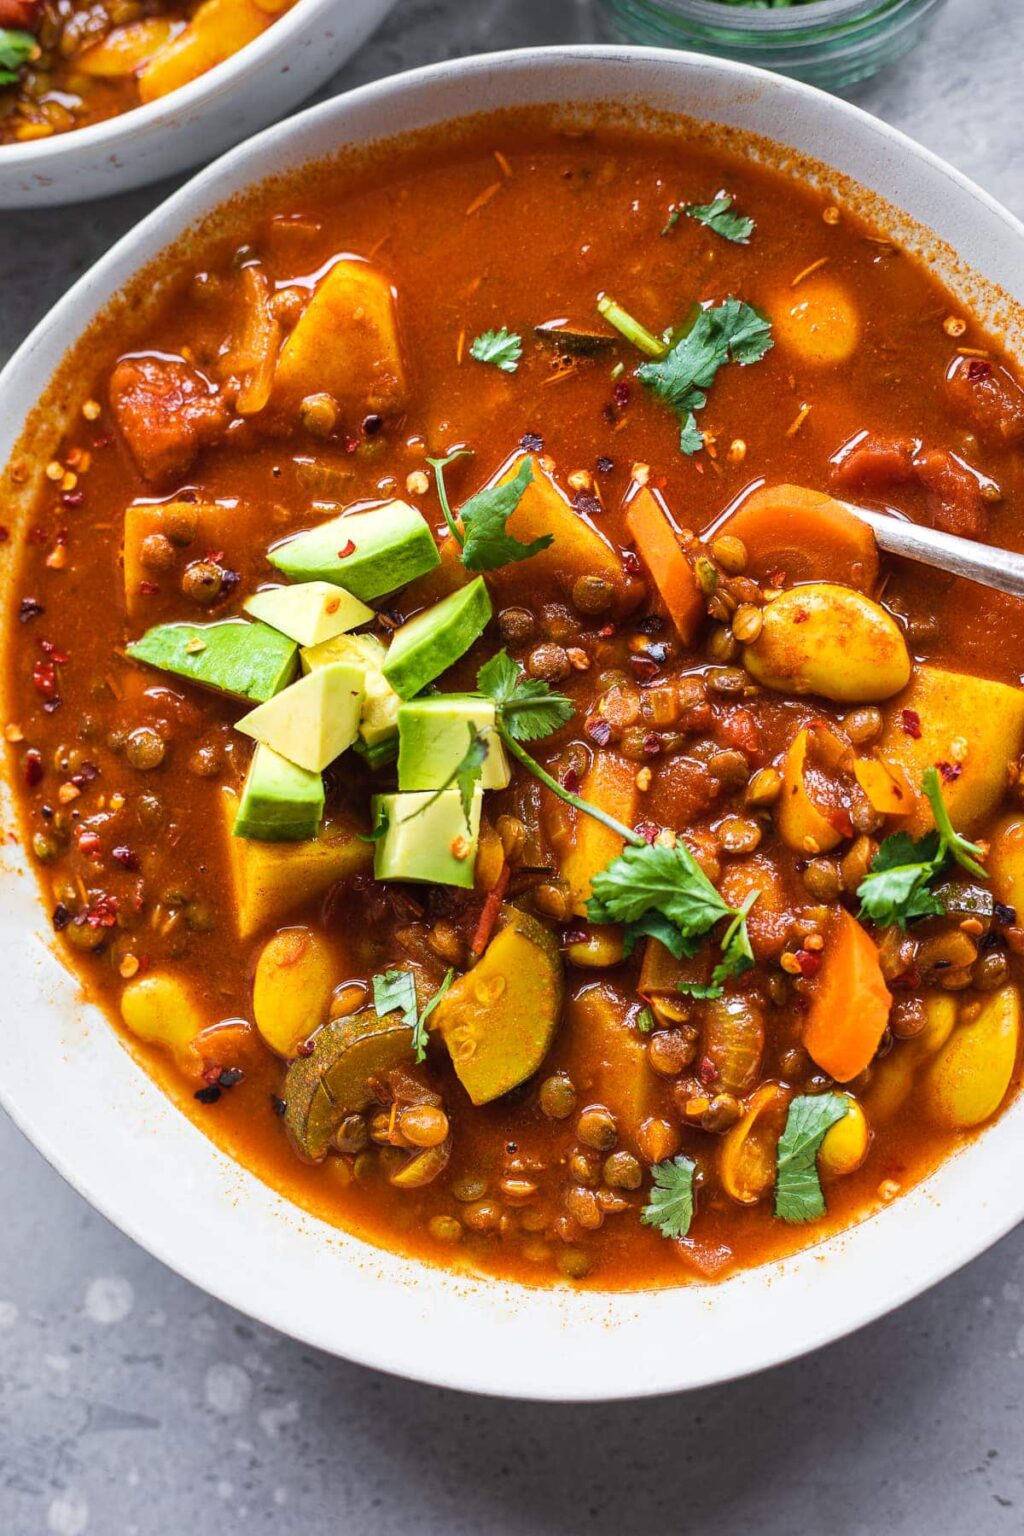 Vegan Lentil Soup With Butter Beans - Oh My Veggies